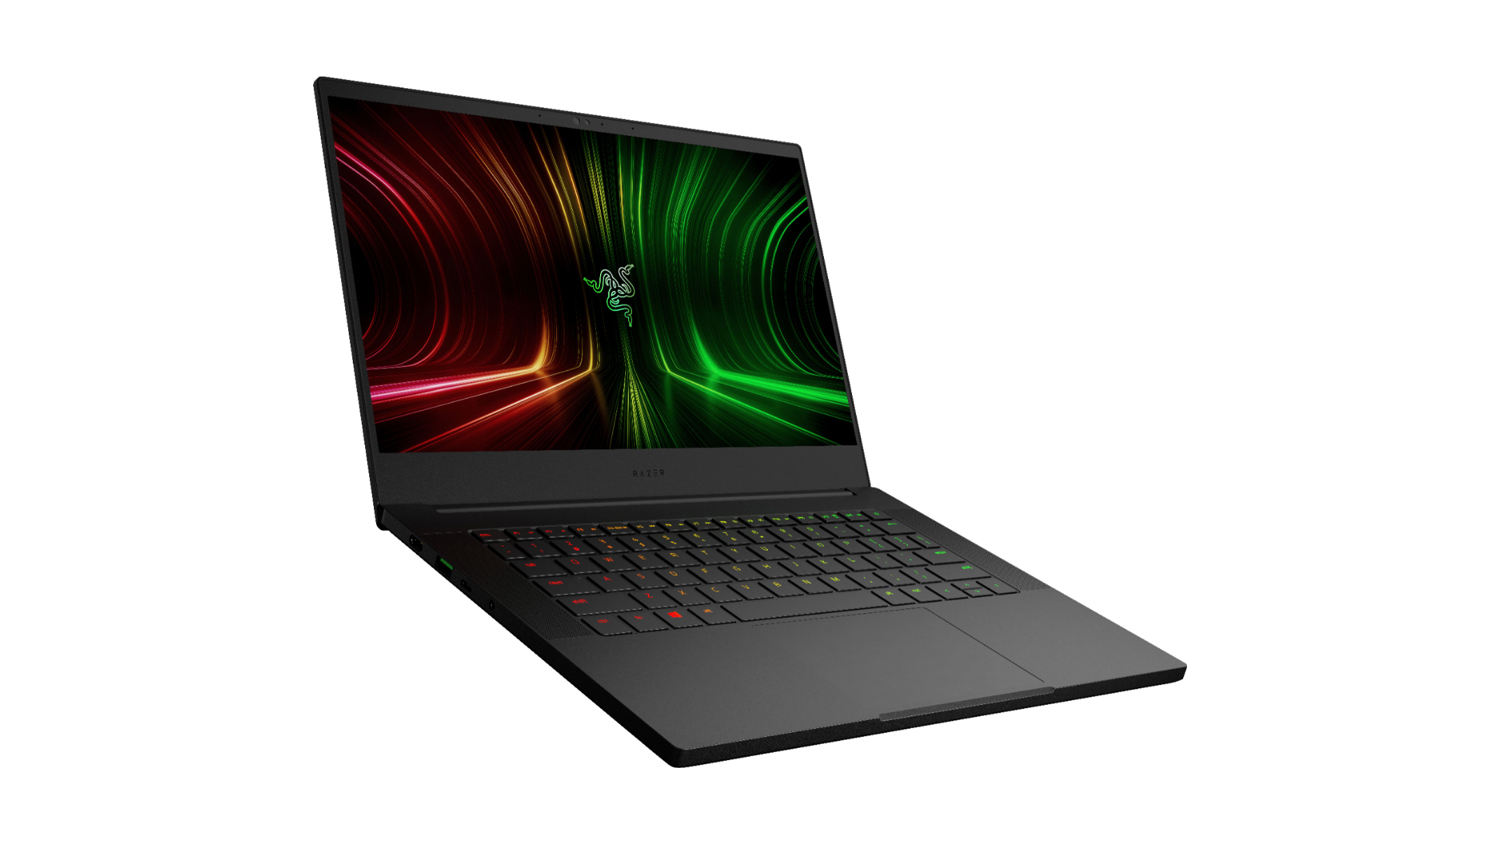 Razer Blade 14 at an angle against a white background